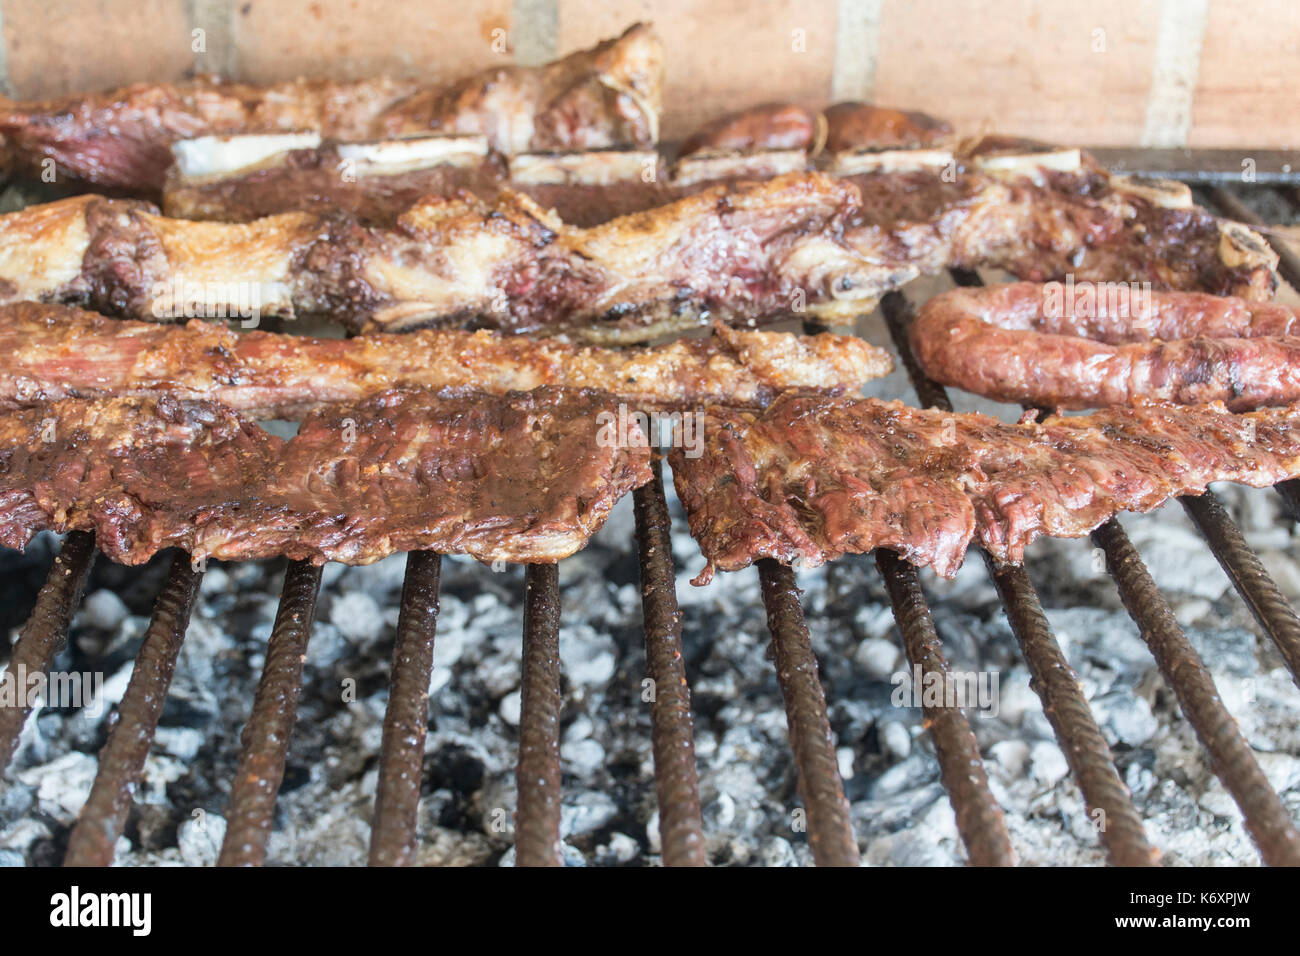 Traditional argentine barbecue or asado. Buenos Aires, Argentina Stock Photo